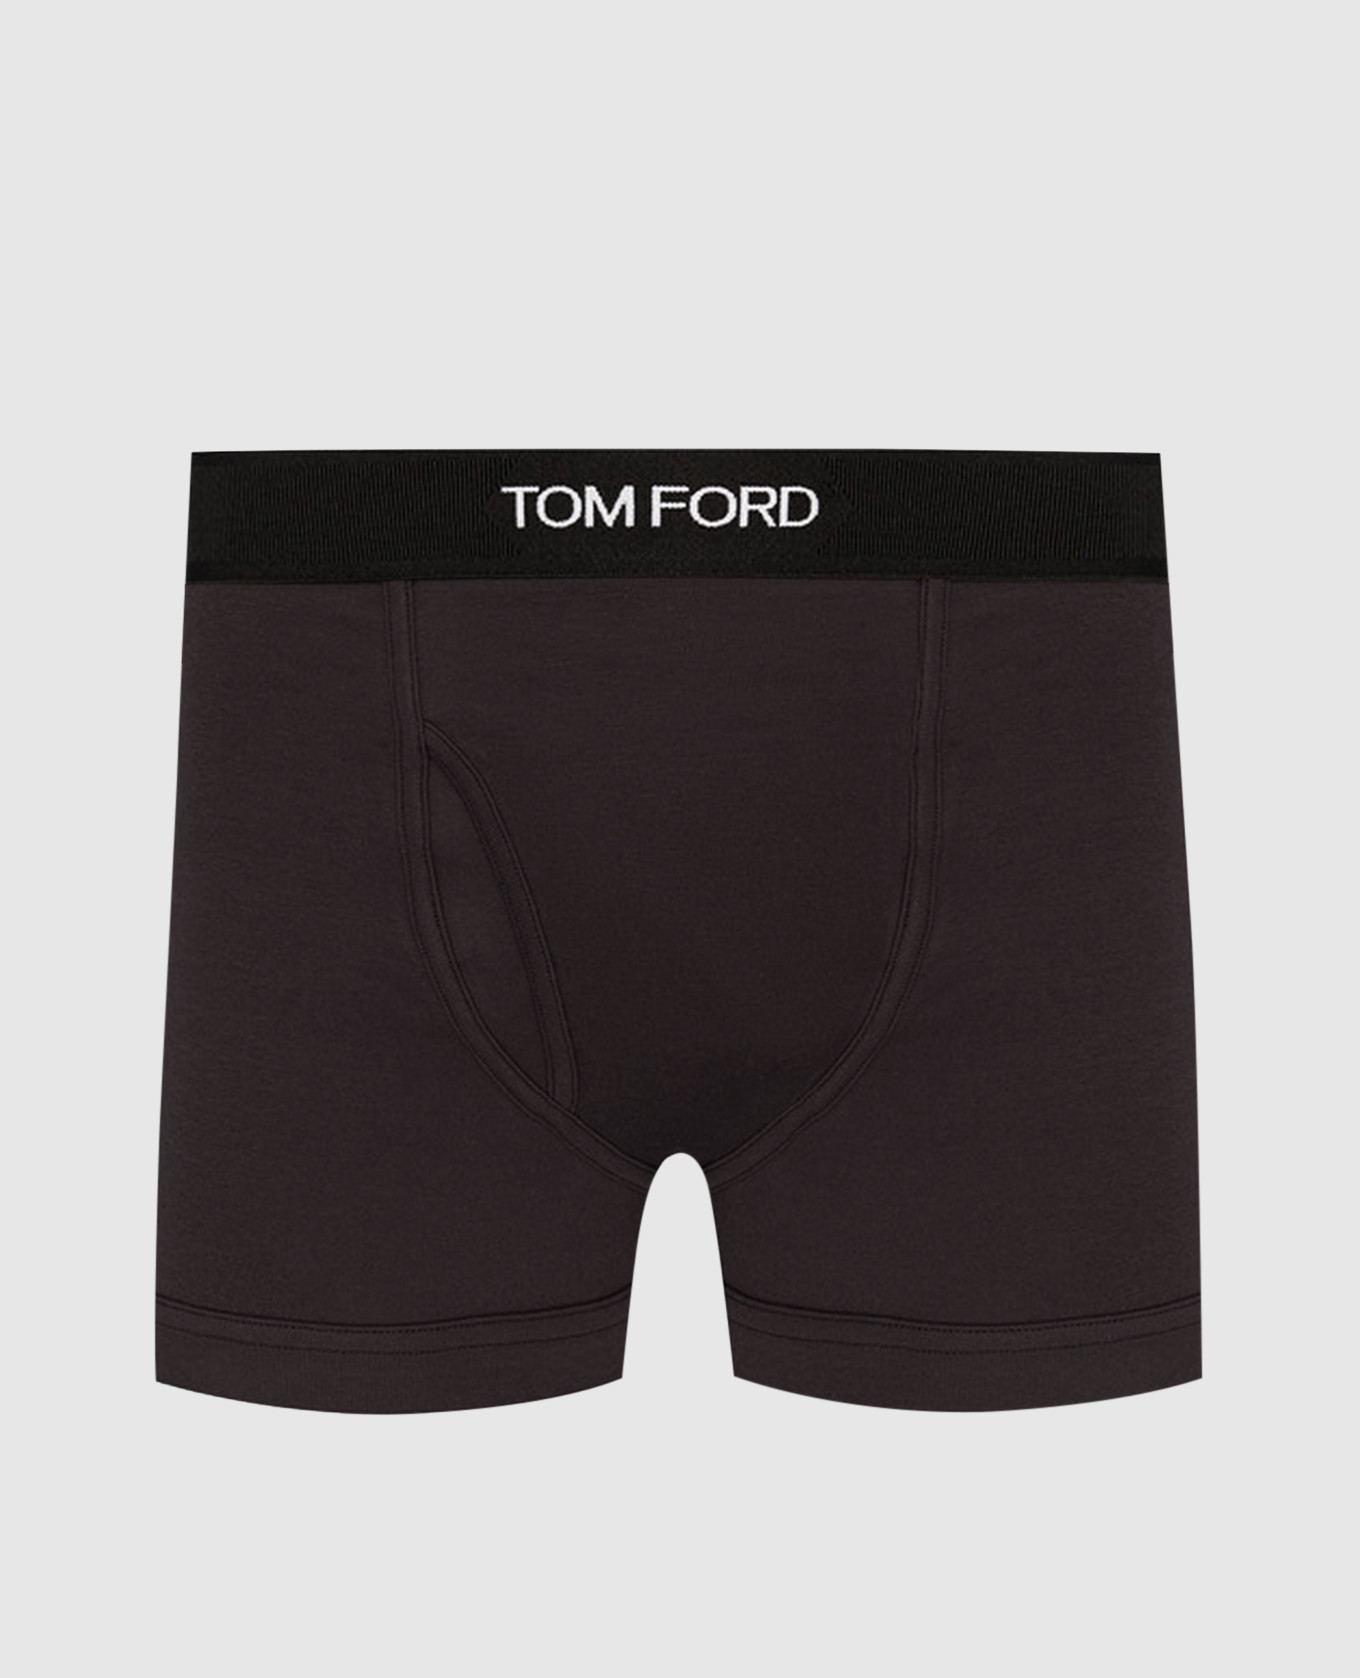 Brown boxer briefs with contrasting logo